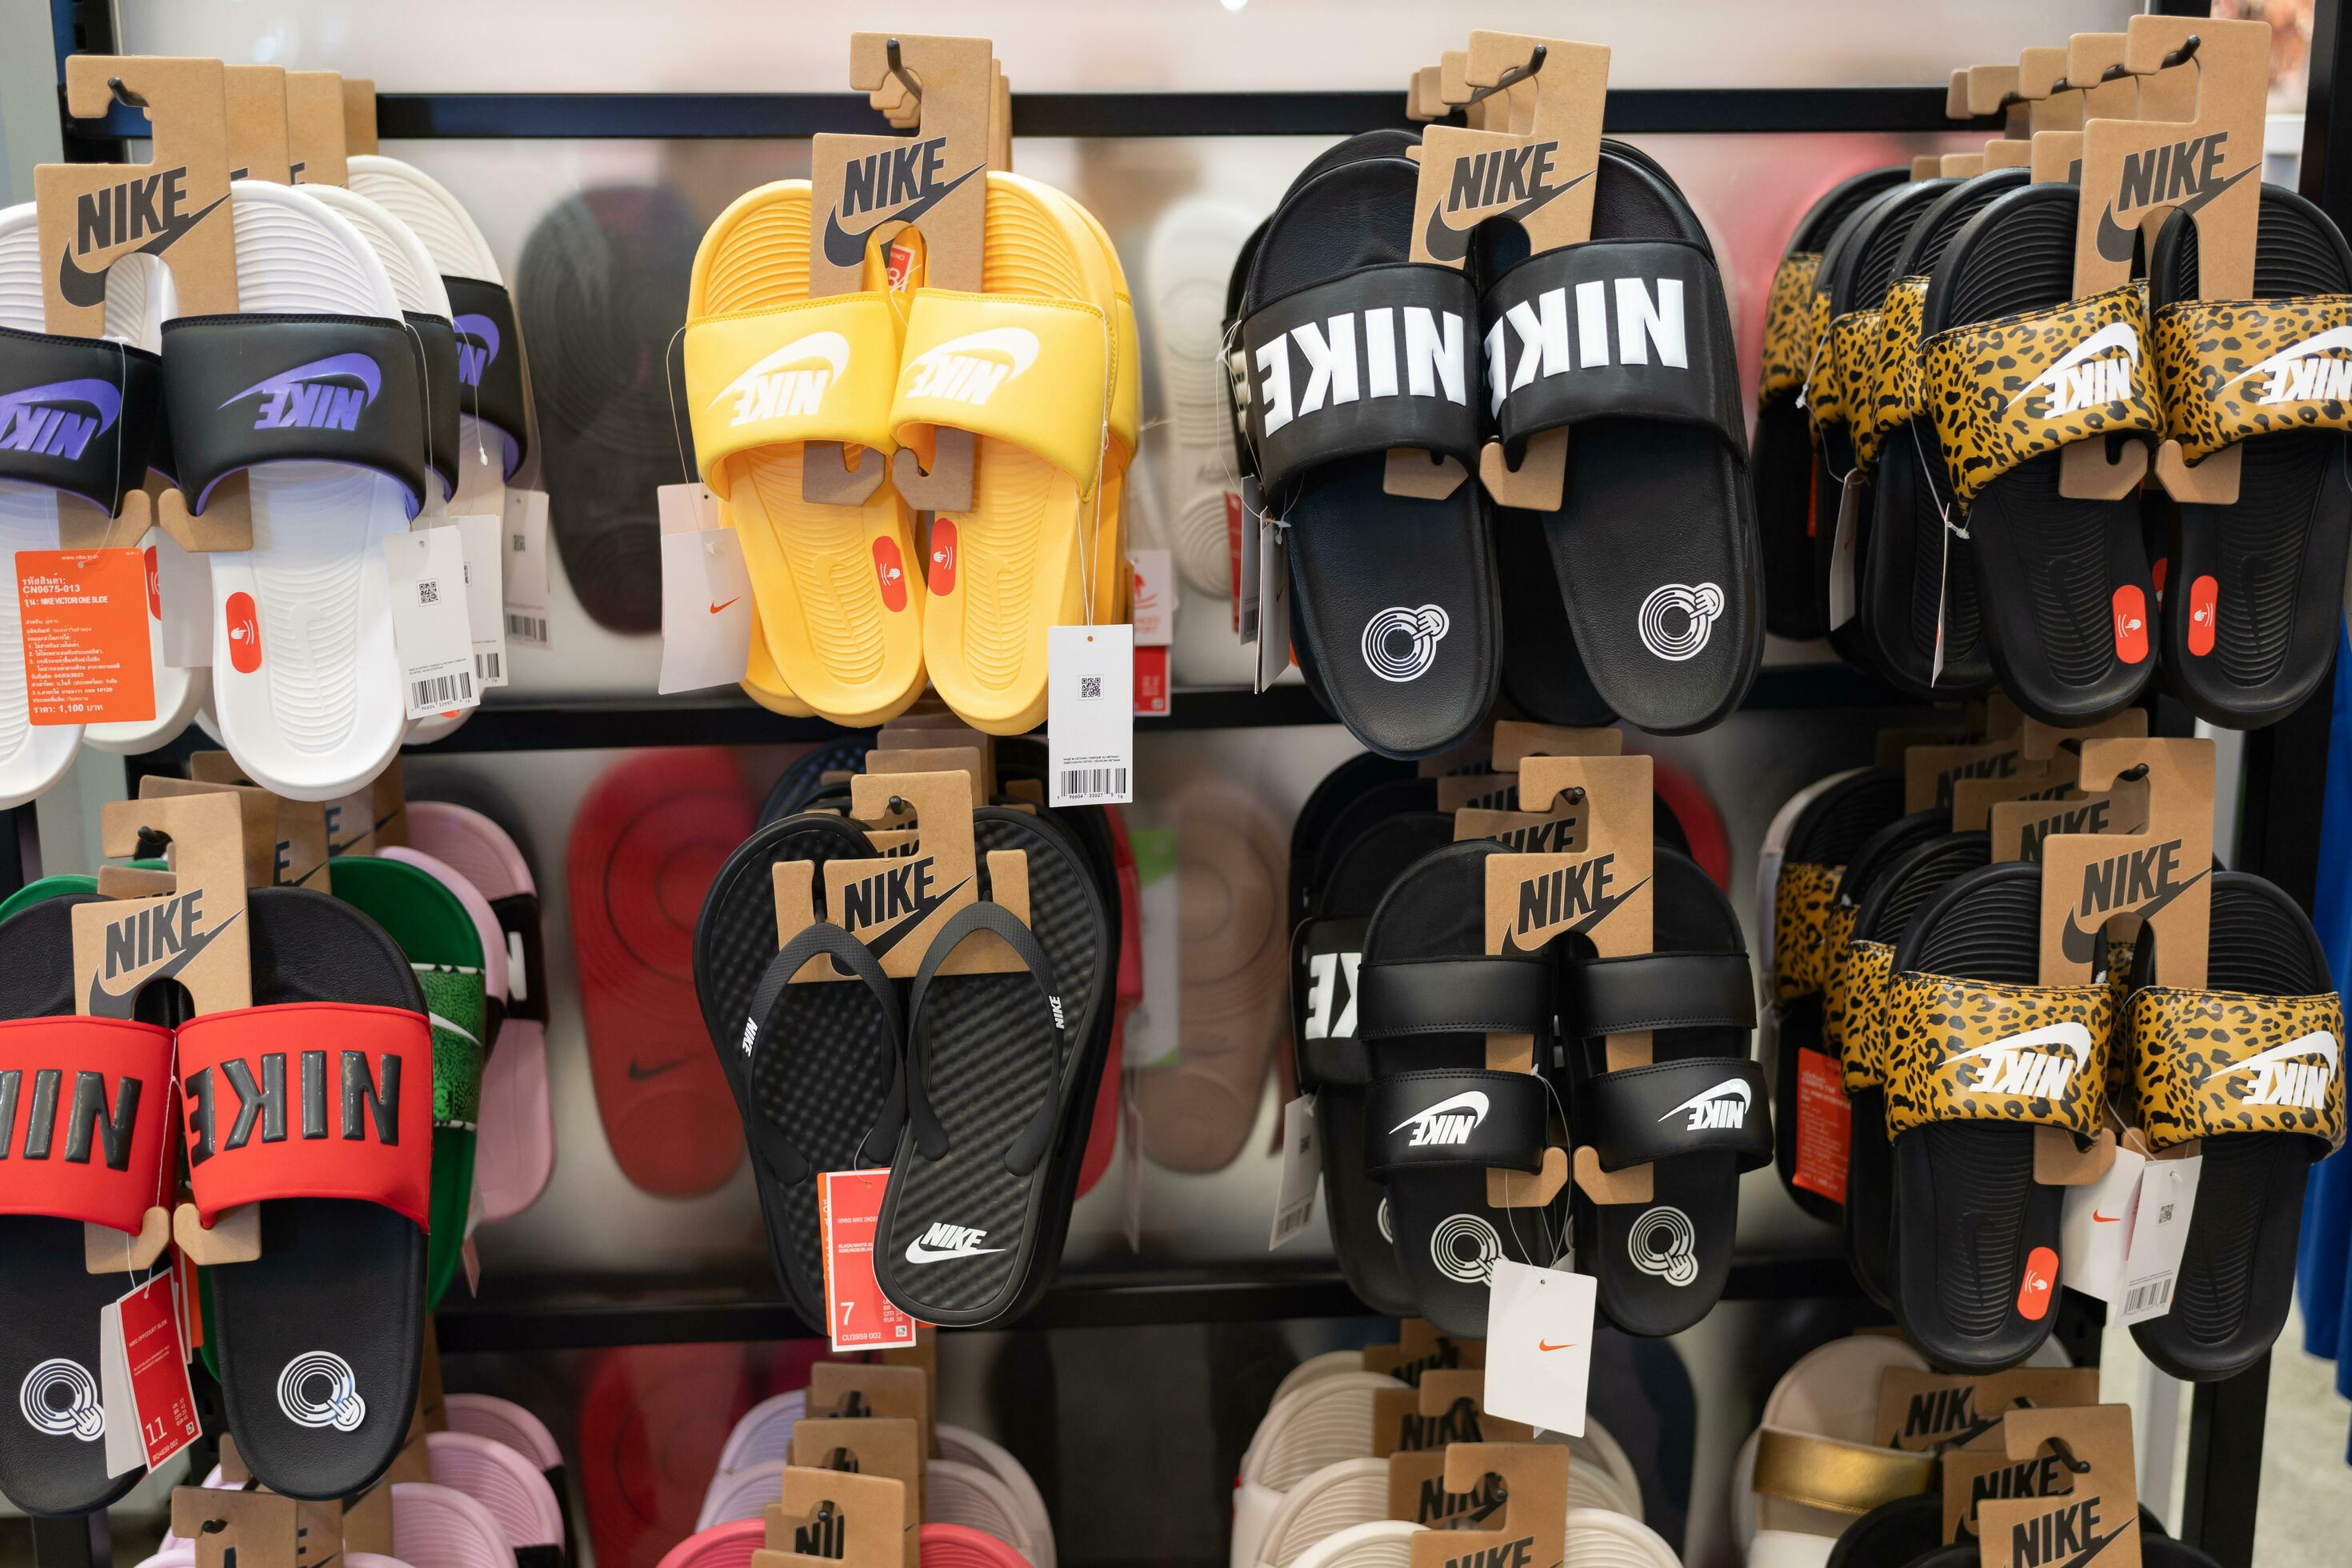 https://static.vecteezy.com/system/resources/previews/026/314/076/large_2x/samut-prakan-thailand-july-2-2023-various-model-of-nike-s-sandals-in-the-shoe-store-free-photo.jpg